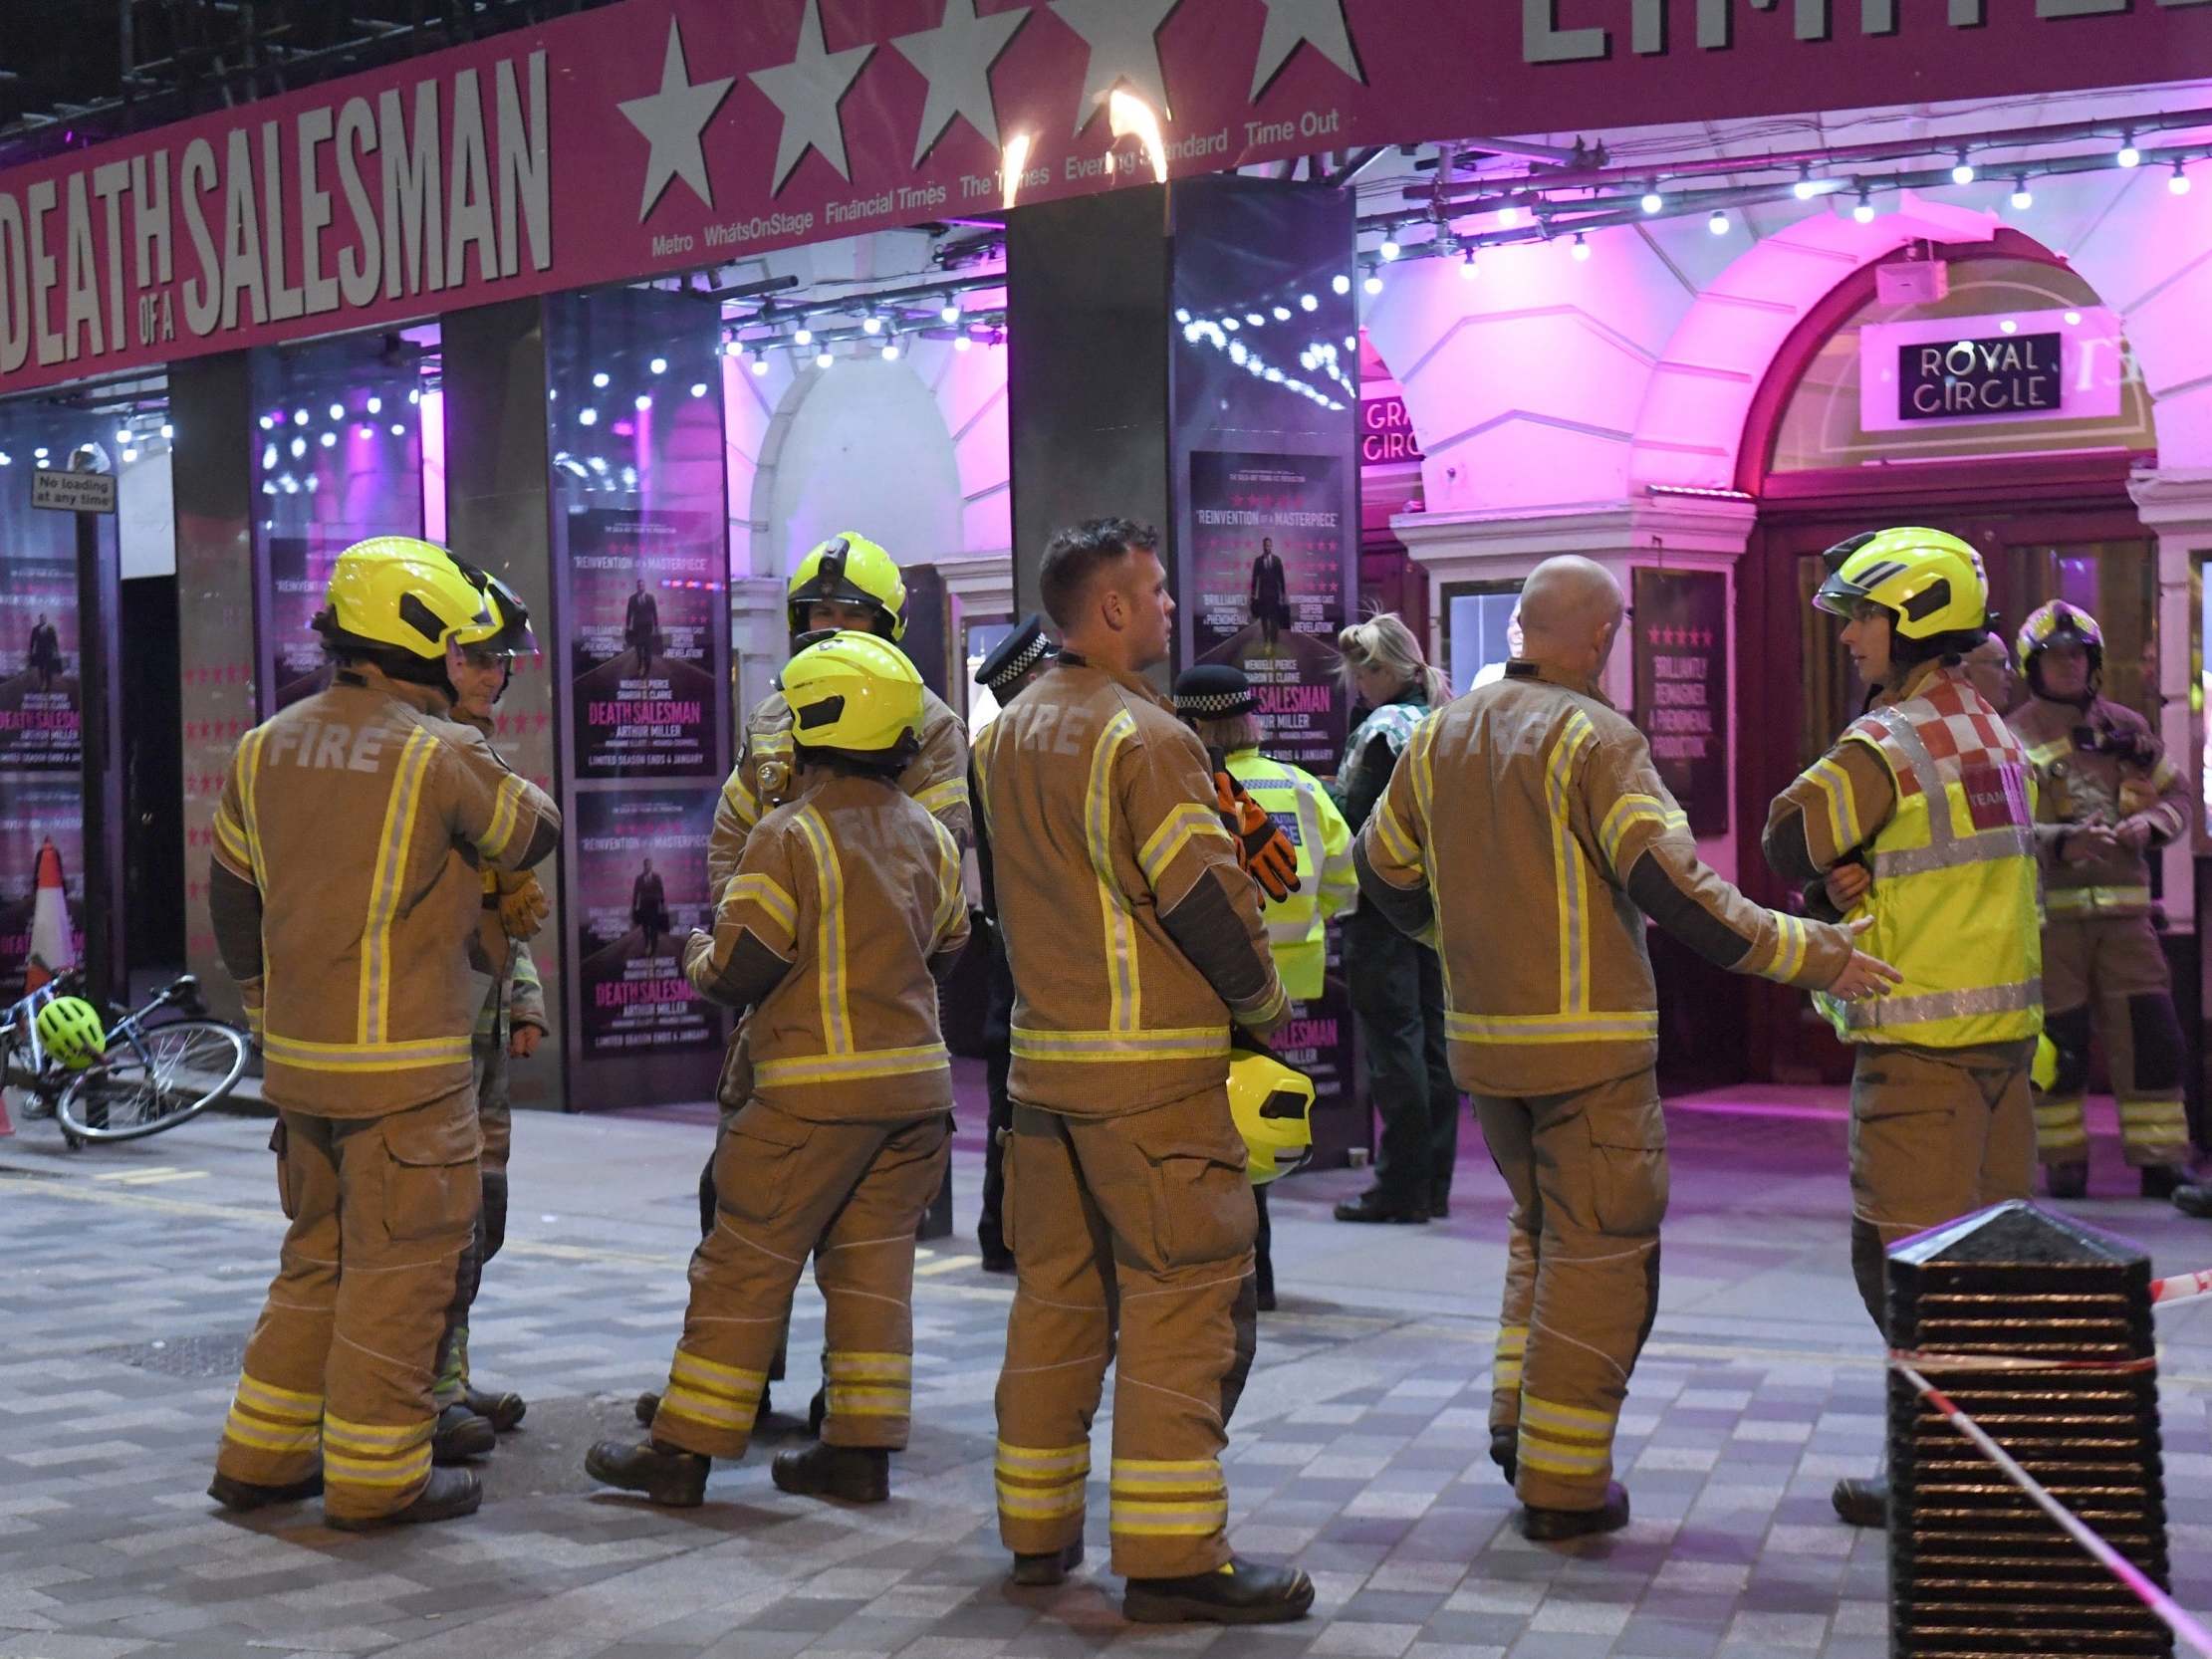 Piccadilly Theatre evacuated after roof collapses during show